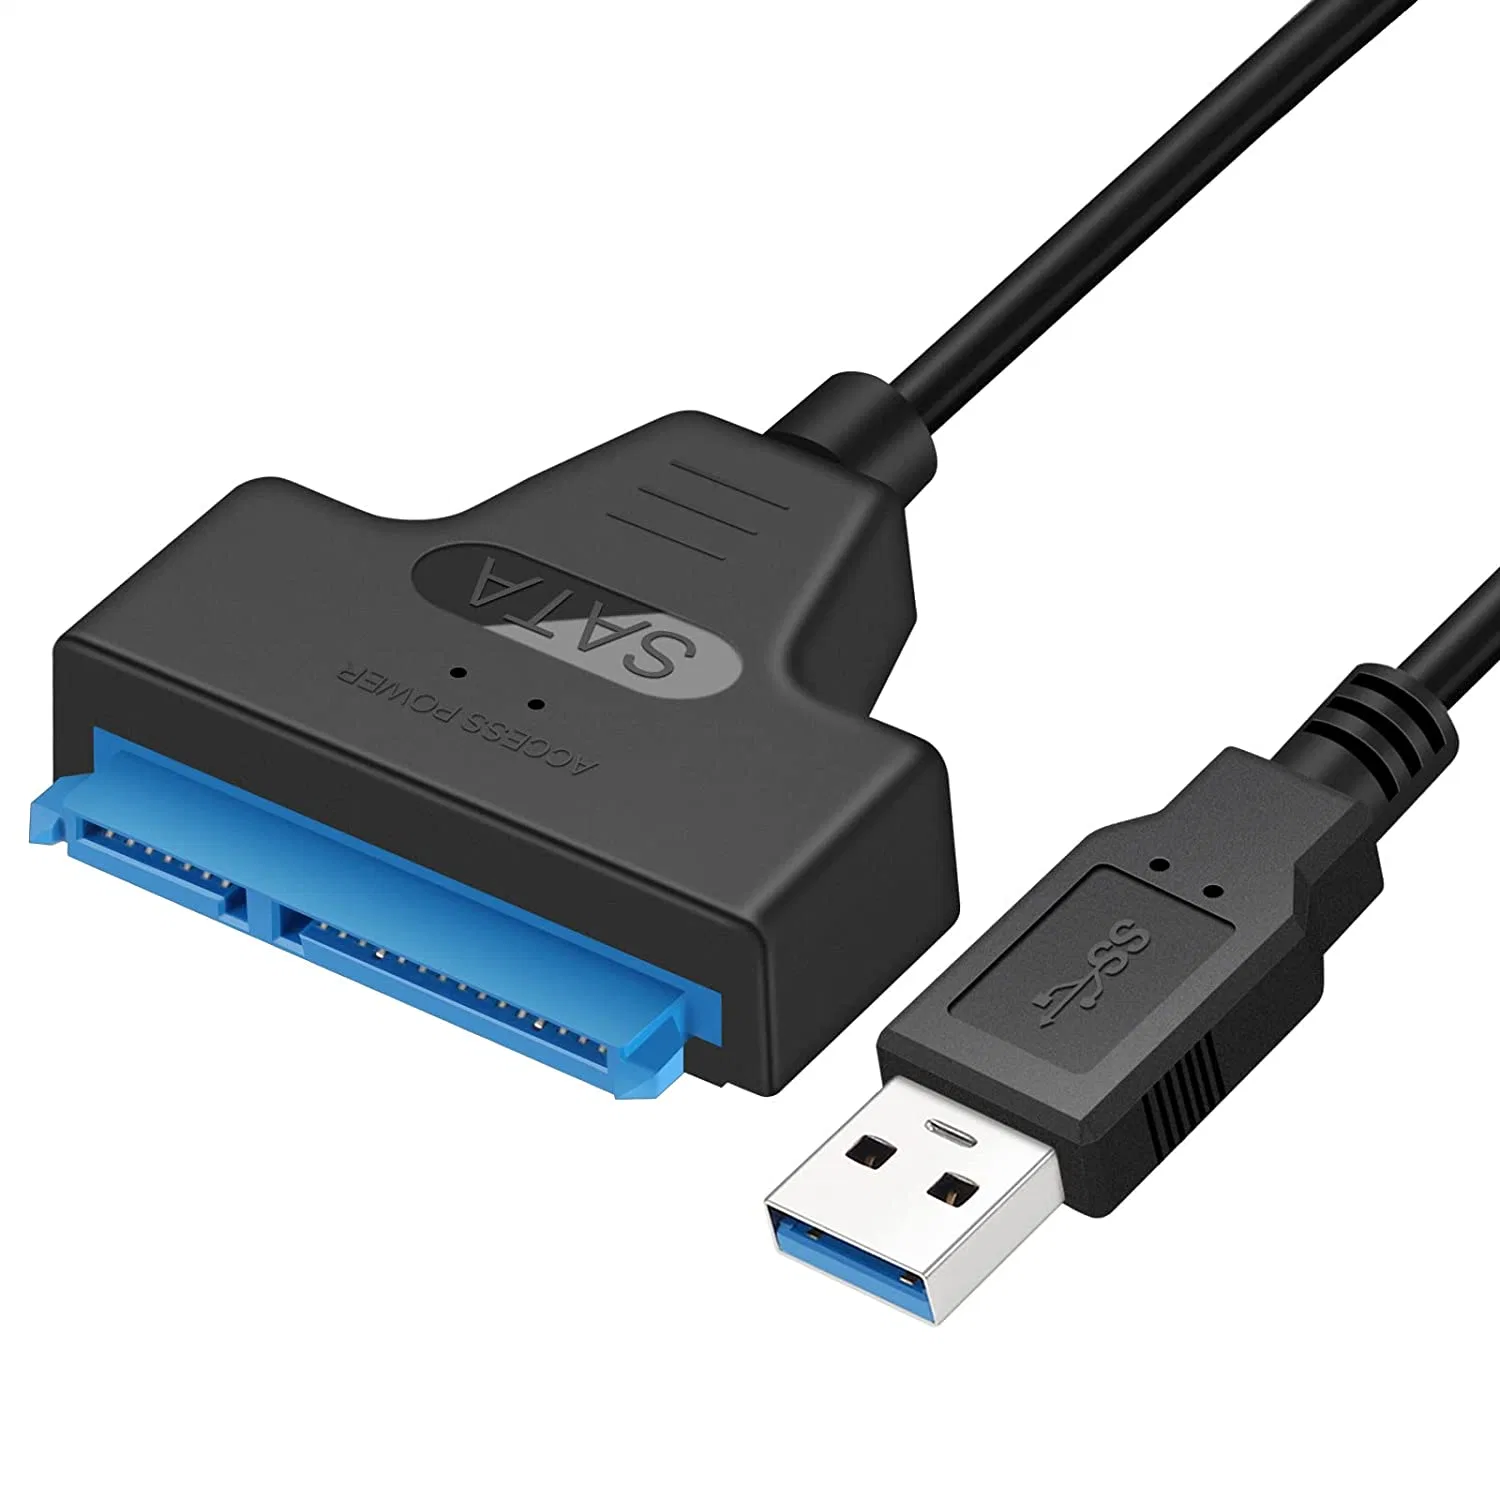 SATA to USB 3.0 Adapter Cable for 2.5 Inch Hard Drive HDD/SSD